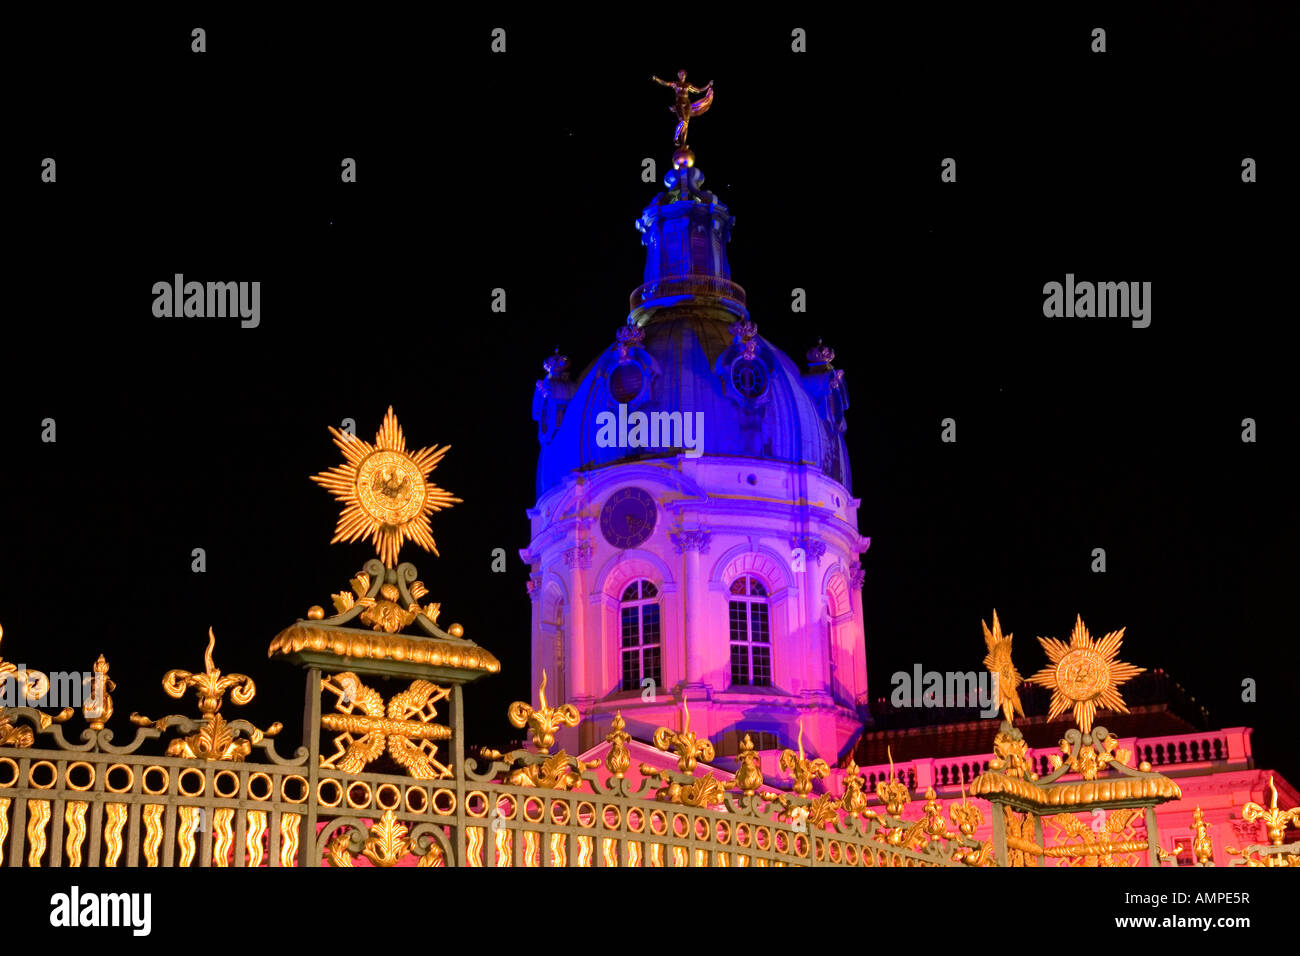 DEU Germany Capital Berlin The illuminated Charlottenburg Palace the summer residence of the Prussian kings built from 1695 to Stock Photo